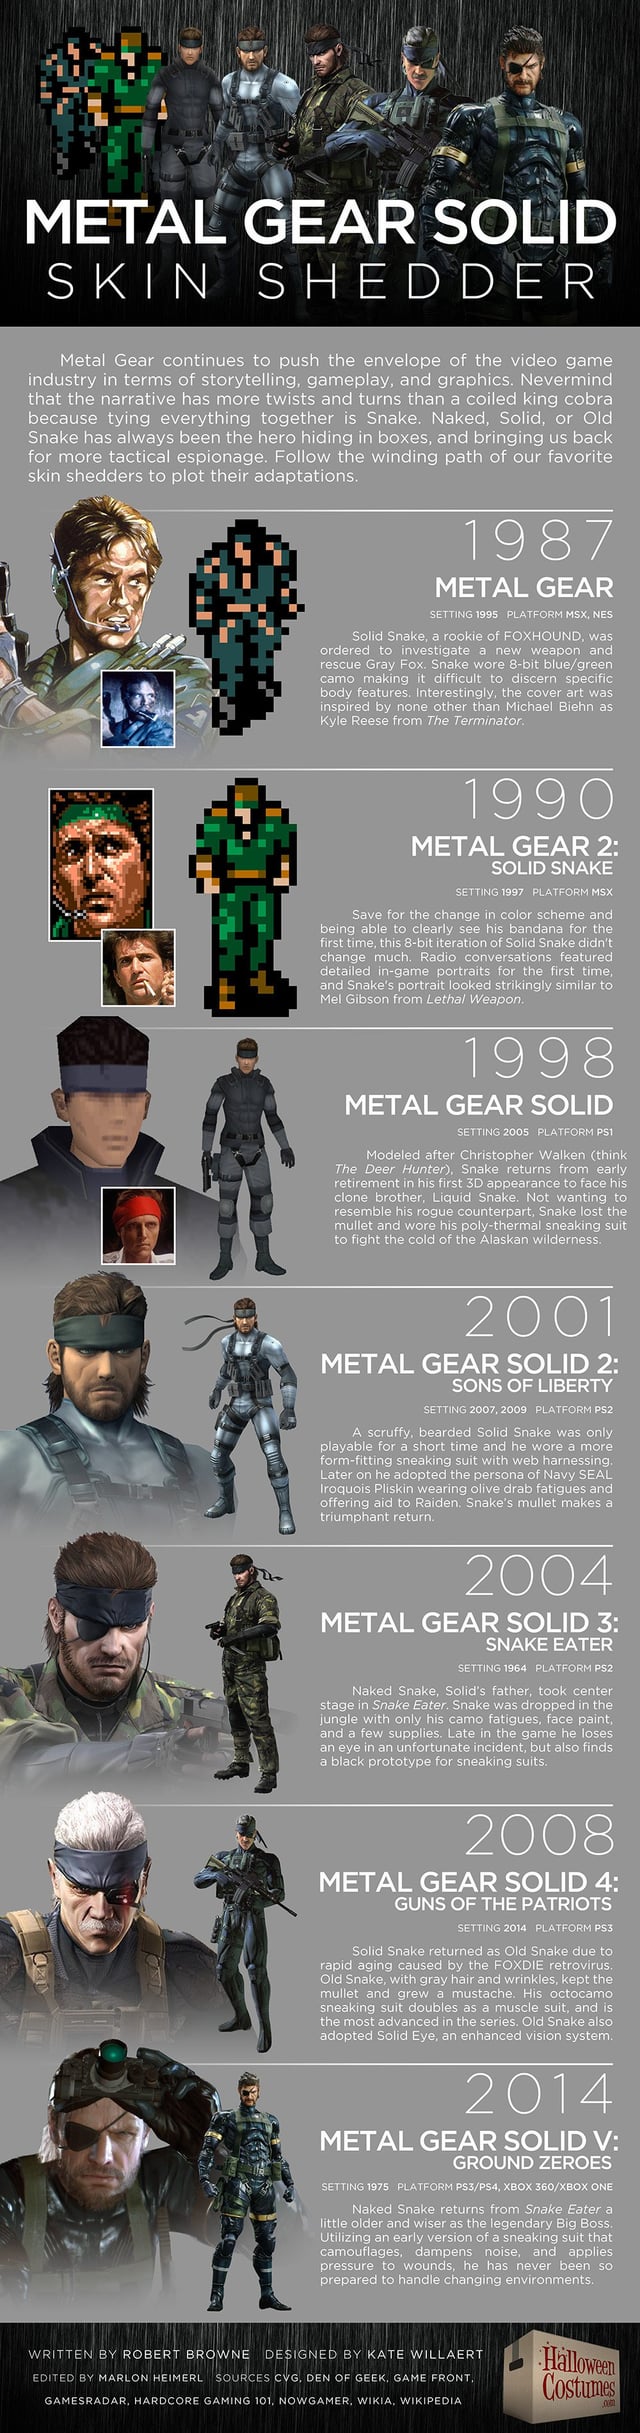 mgs all snakes explained